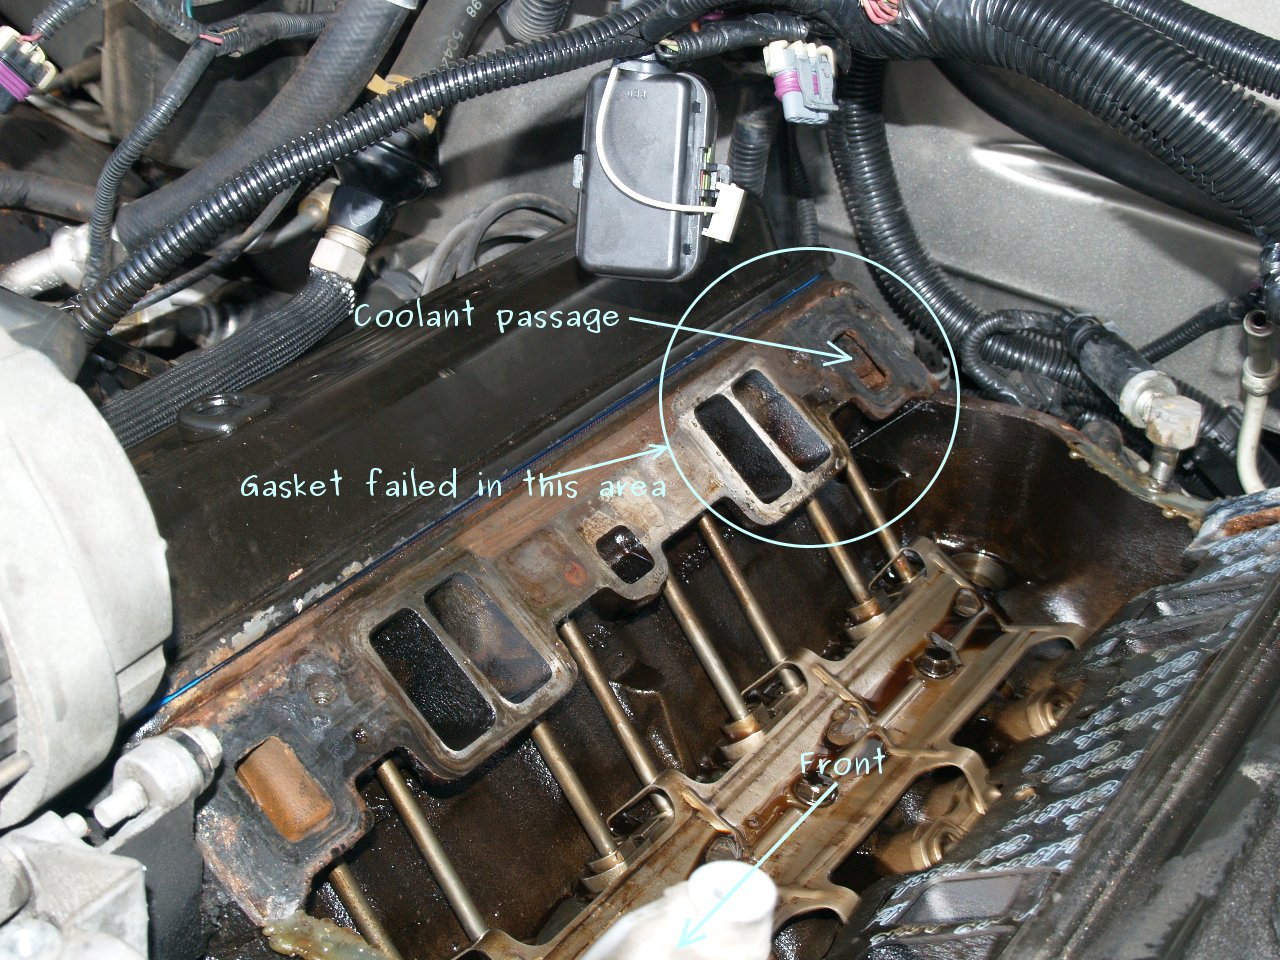 See P0774 in engine